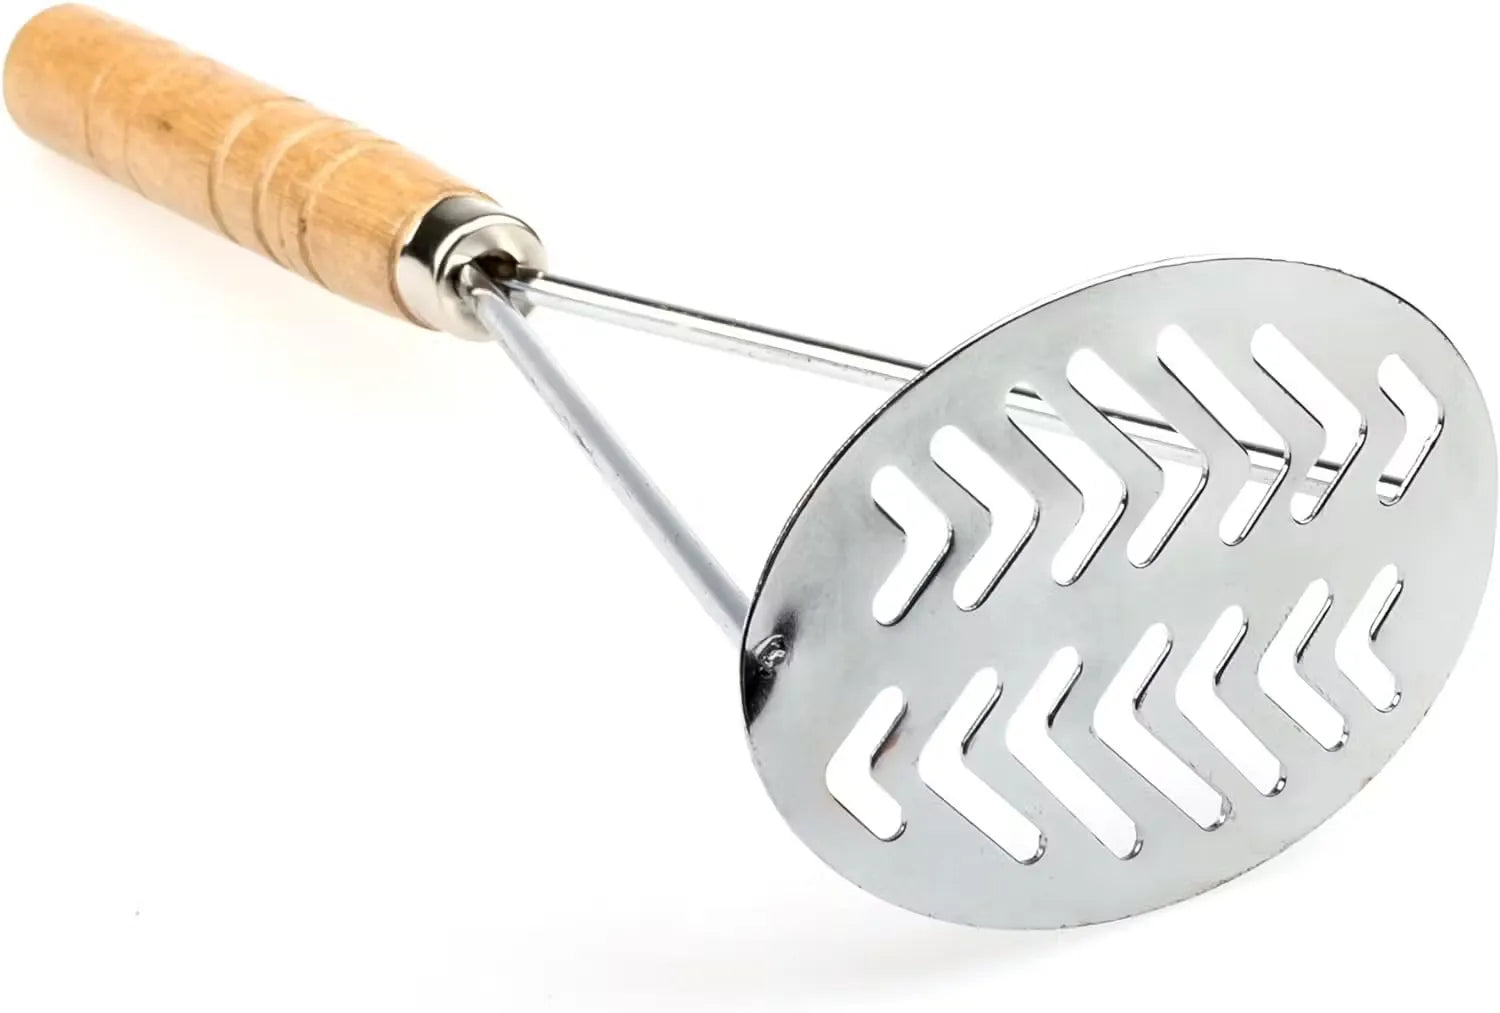 Stainless Steel Potato Masher with Wooden Handle Mash with Style